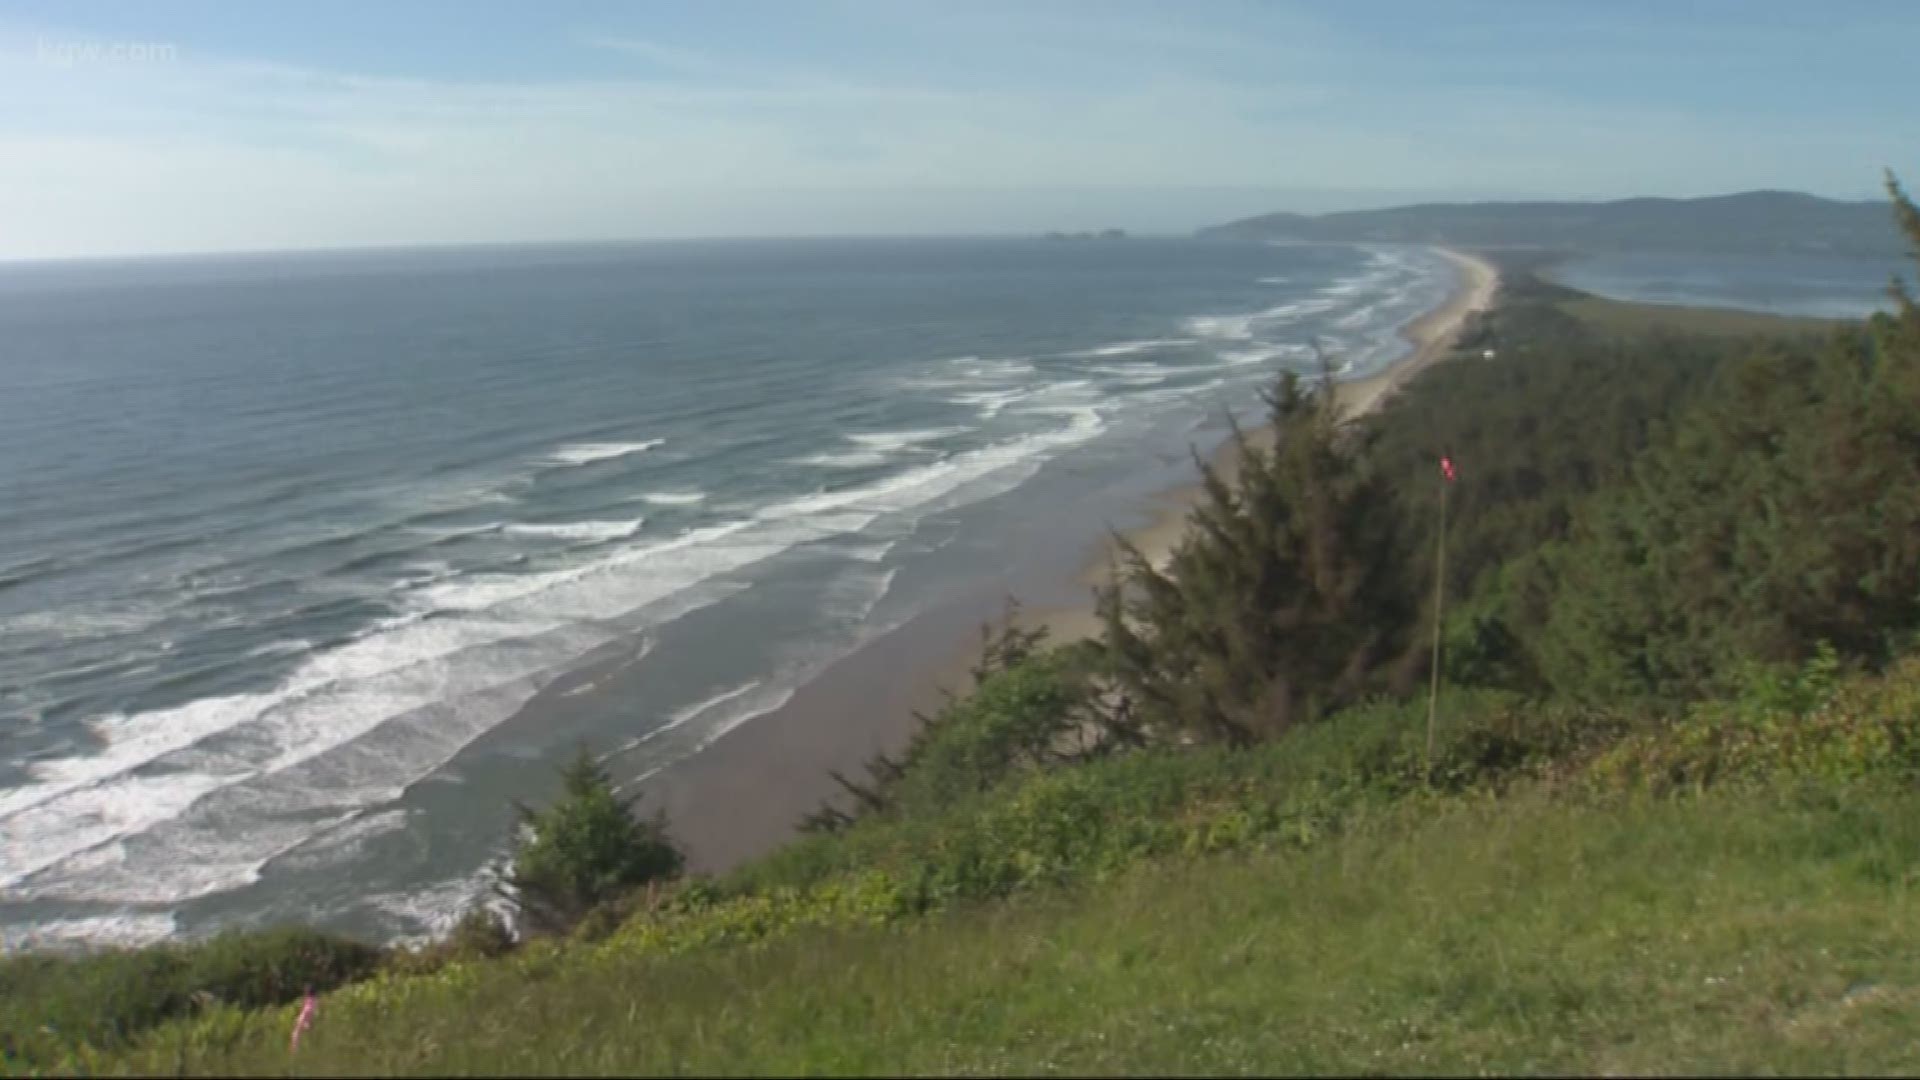 A Beaverton man died Sunday night after he crashed while paragliding on the Oregon Coast.